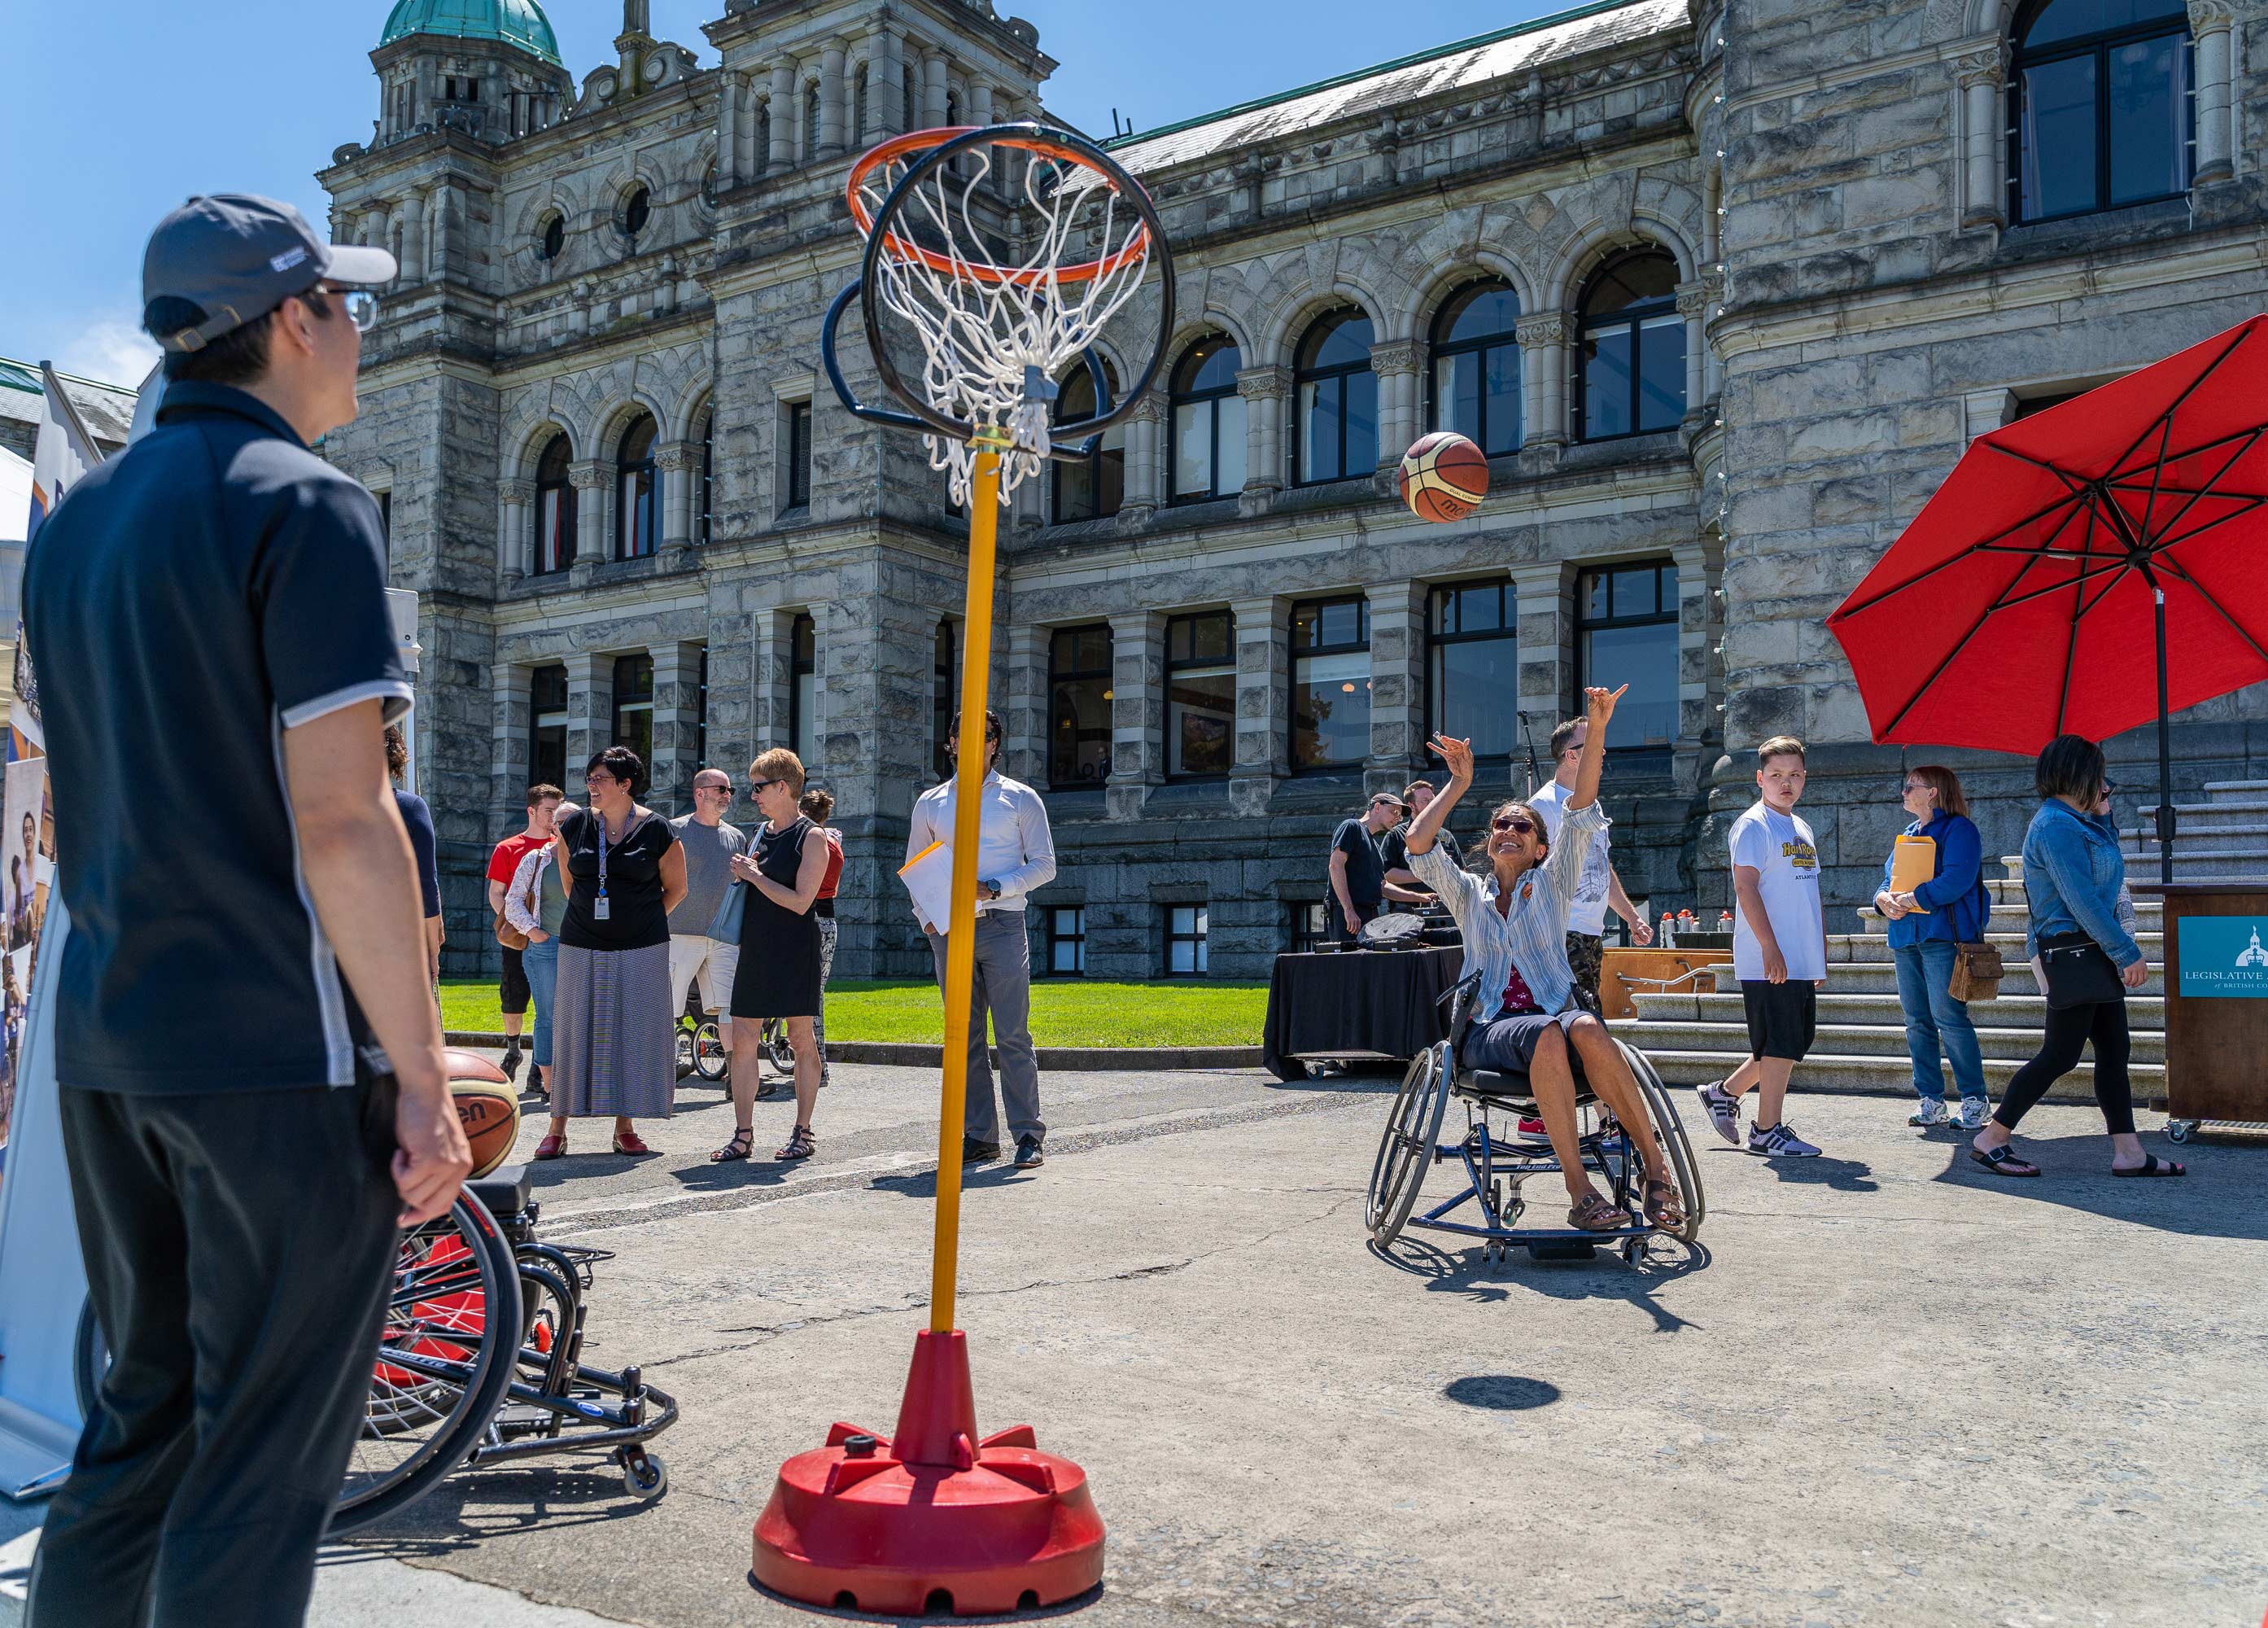 wheelchair user playing basket ball in the street